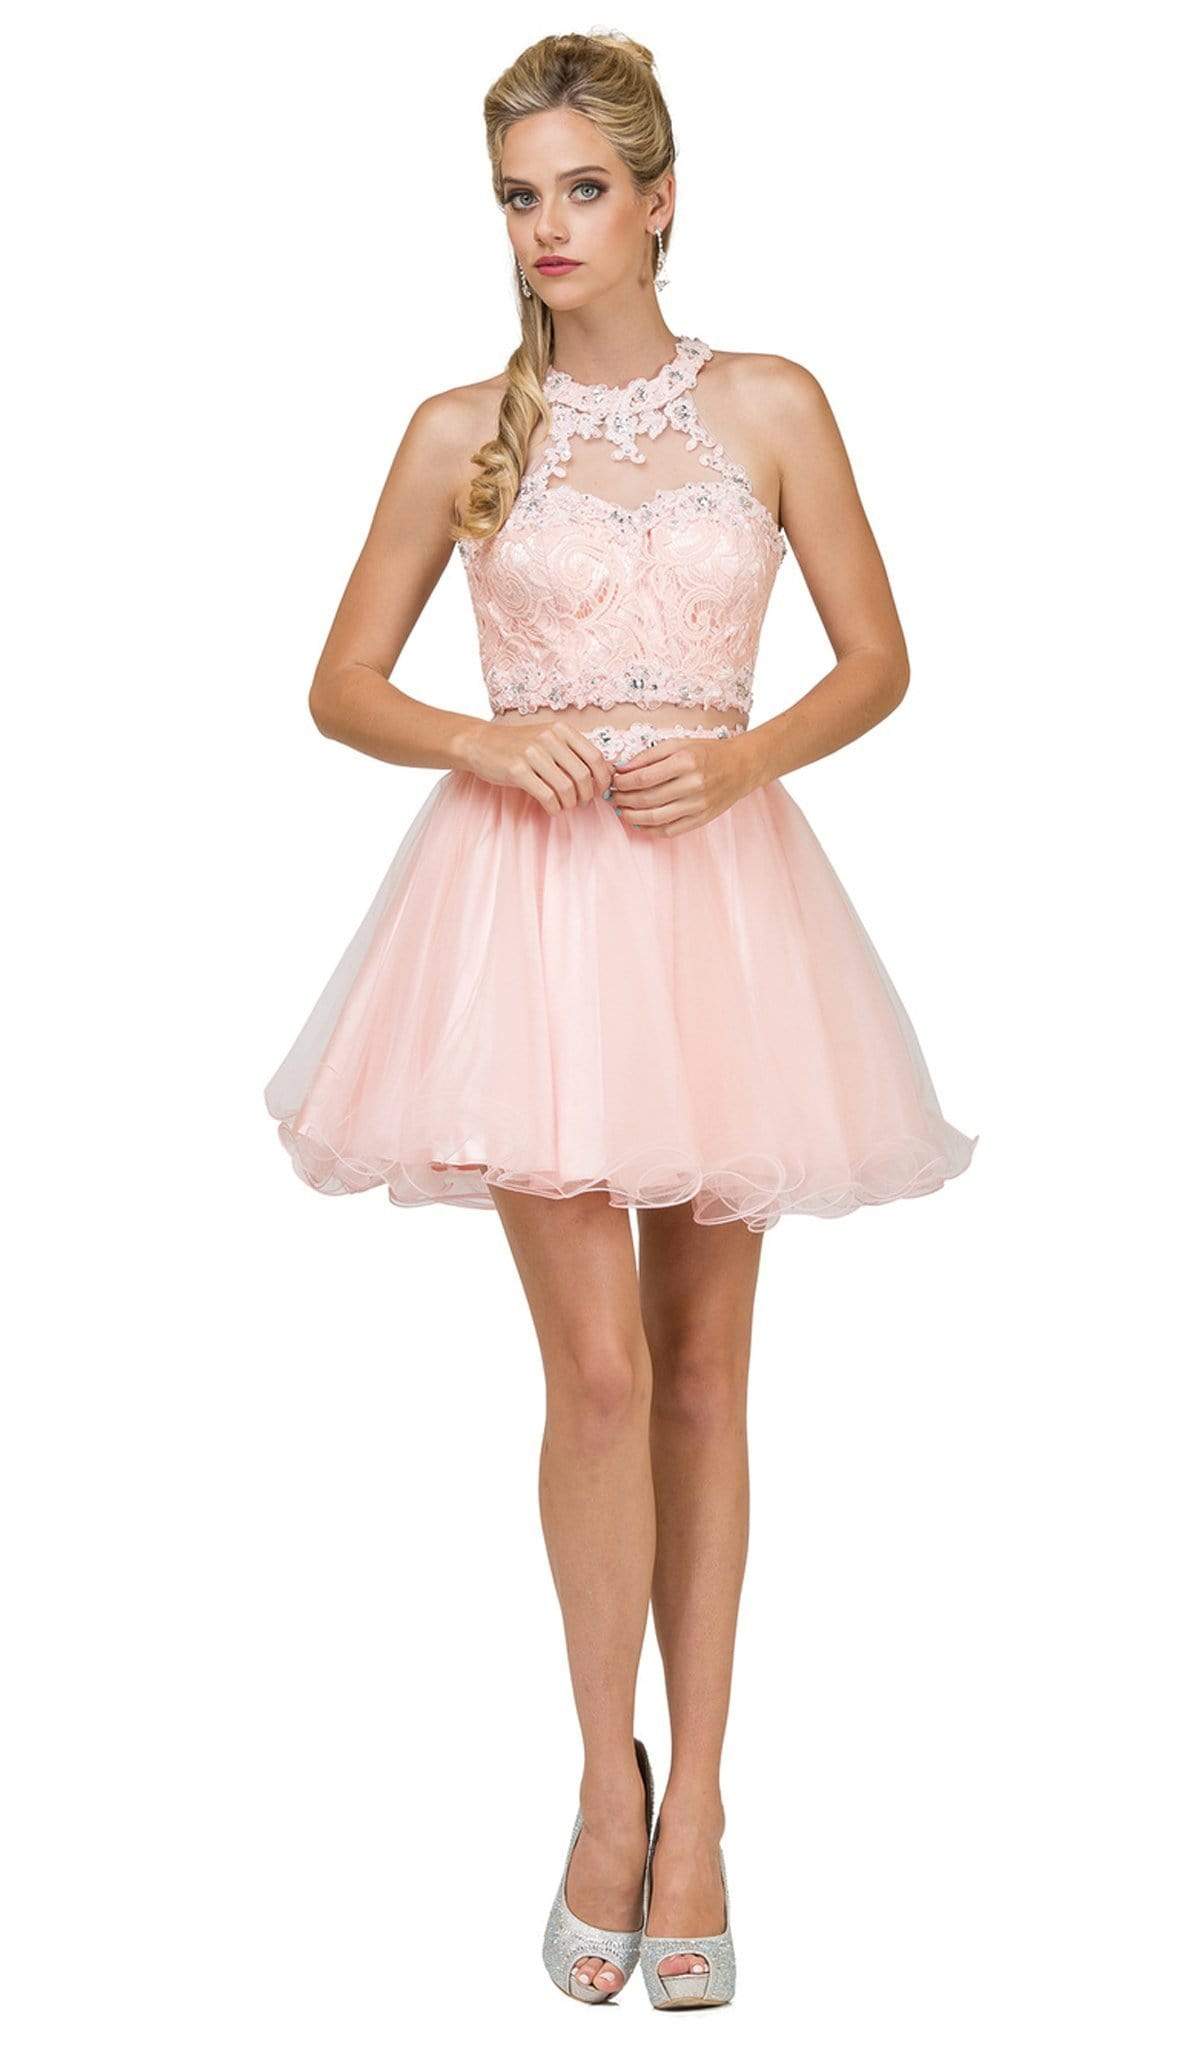 Image of Dancing Queen - 9631 Appliqued Illusion High Neck Two-Piece Cocktail Dress